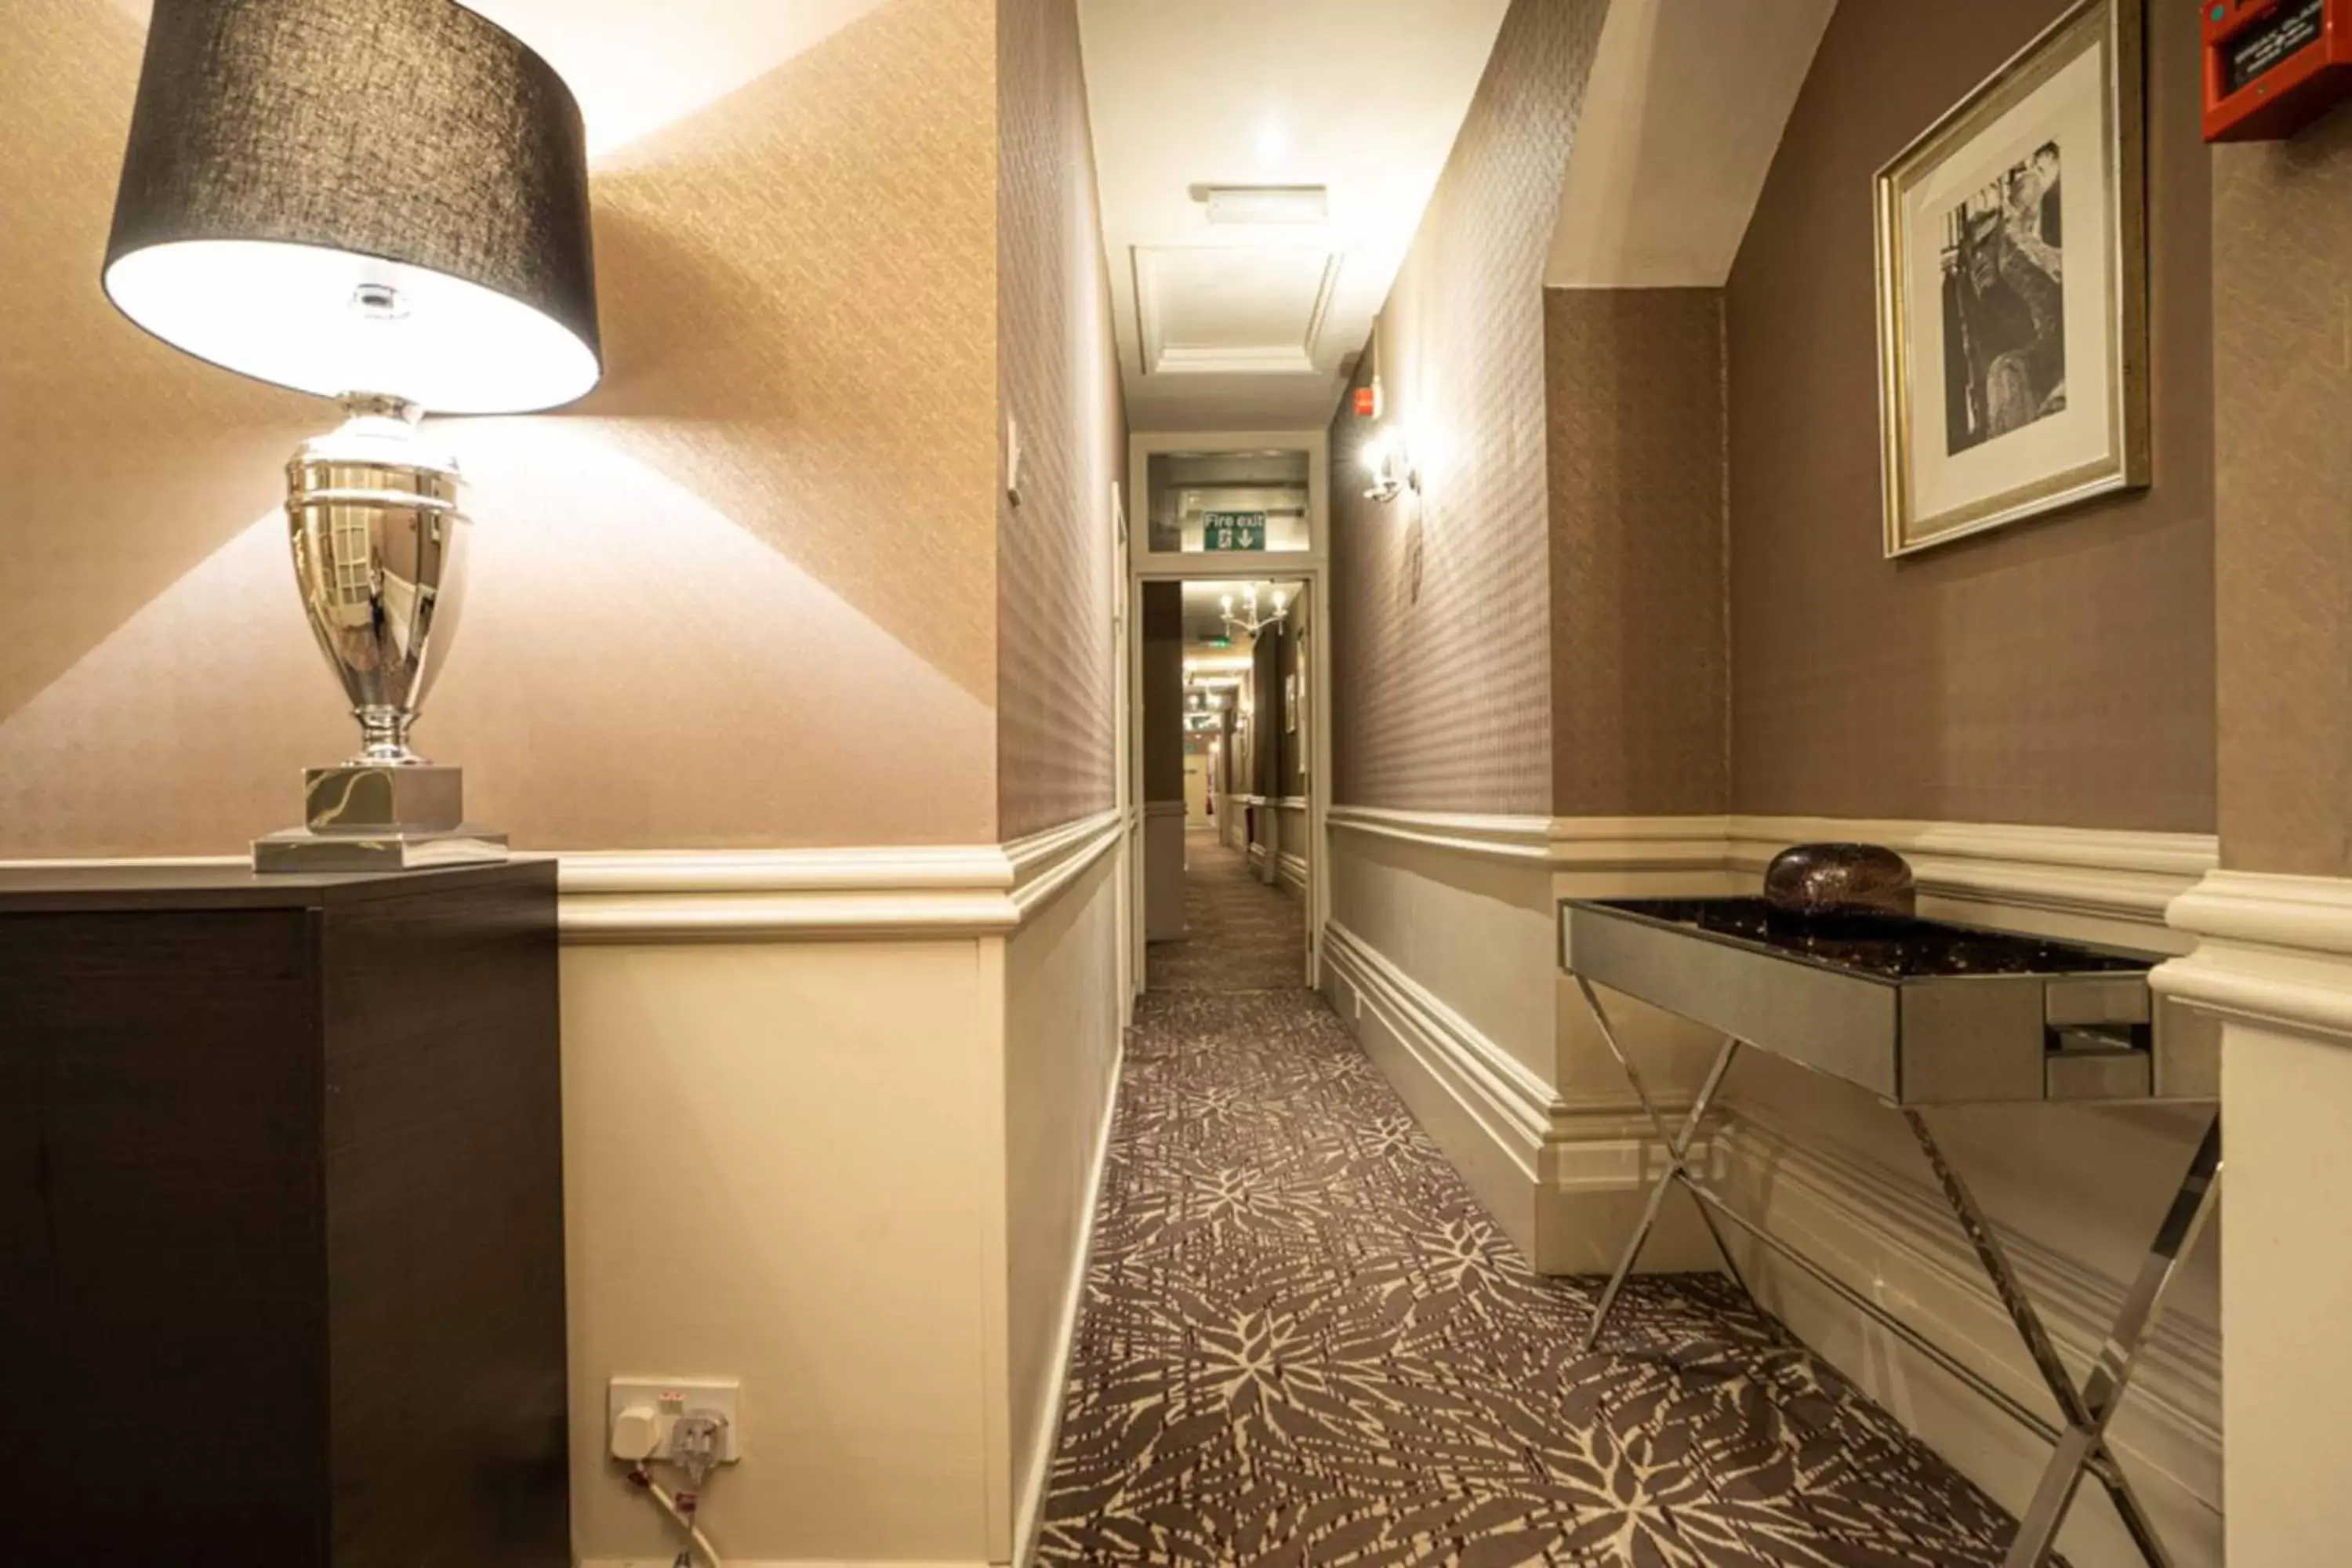 Area and facilities, Lobby/Reception in The Swan Hotel, Wells, Somerset